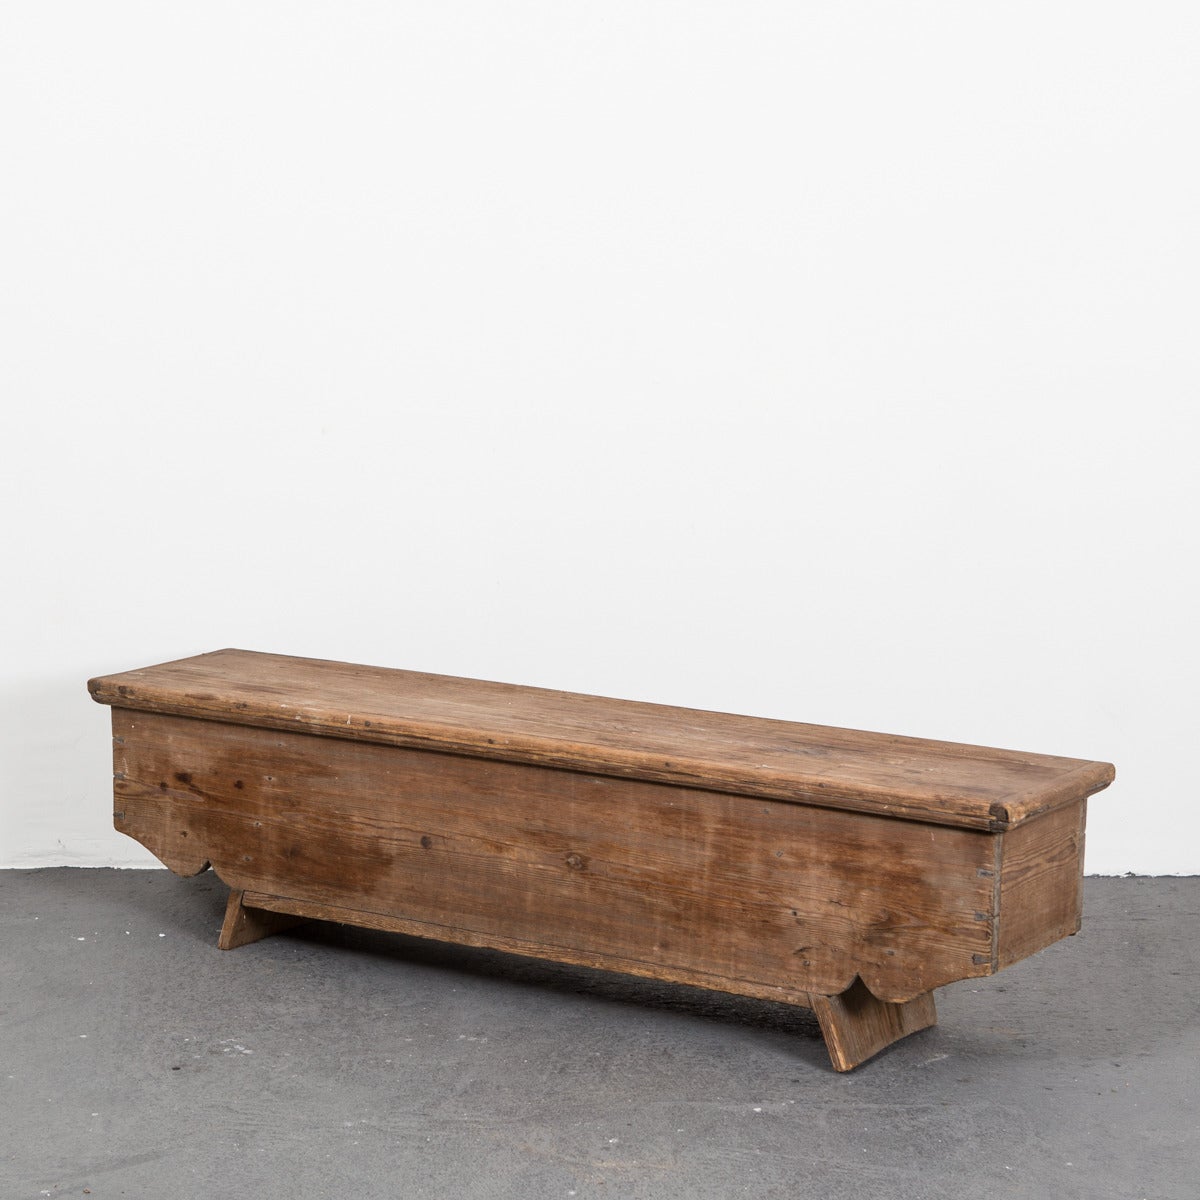 A storage bench made in Sweden during the 18th Century. All original paint and hardware. Interior with three storage spaces. Visible dove tail joints. Curved frieze. Gorgeous patina. Perfect as additional seating in a living room or as storage.